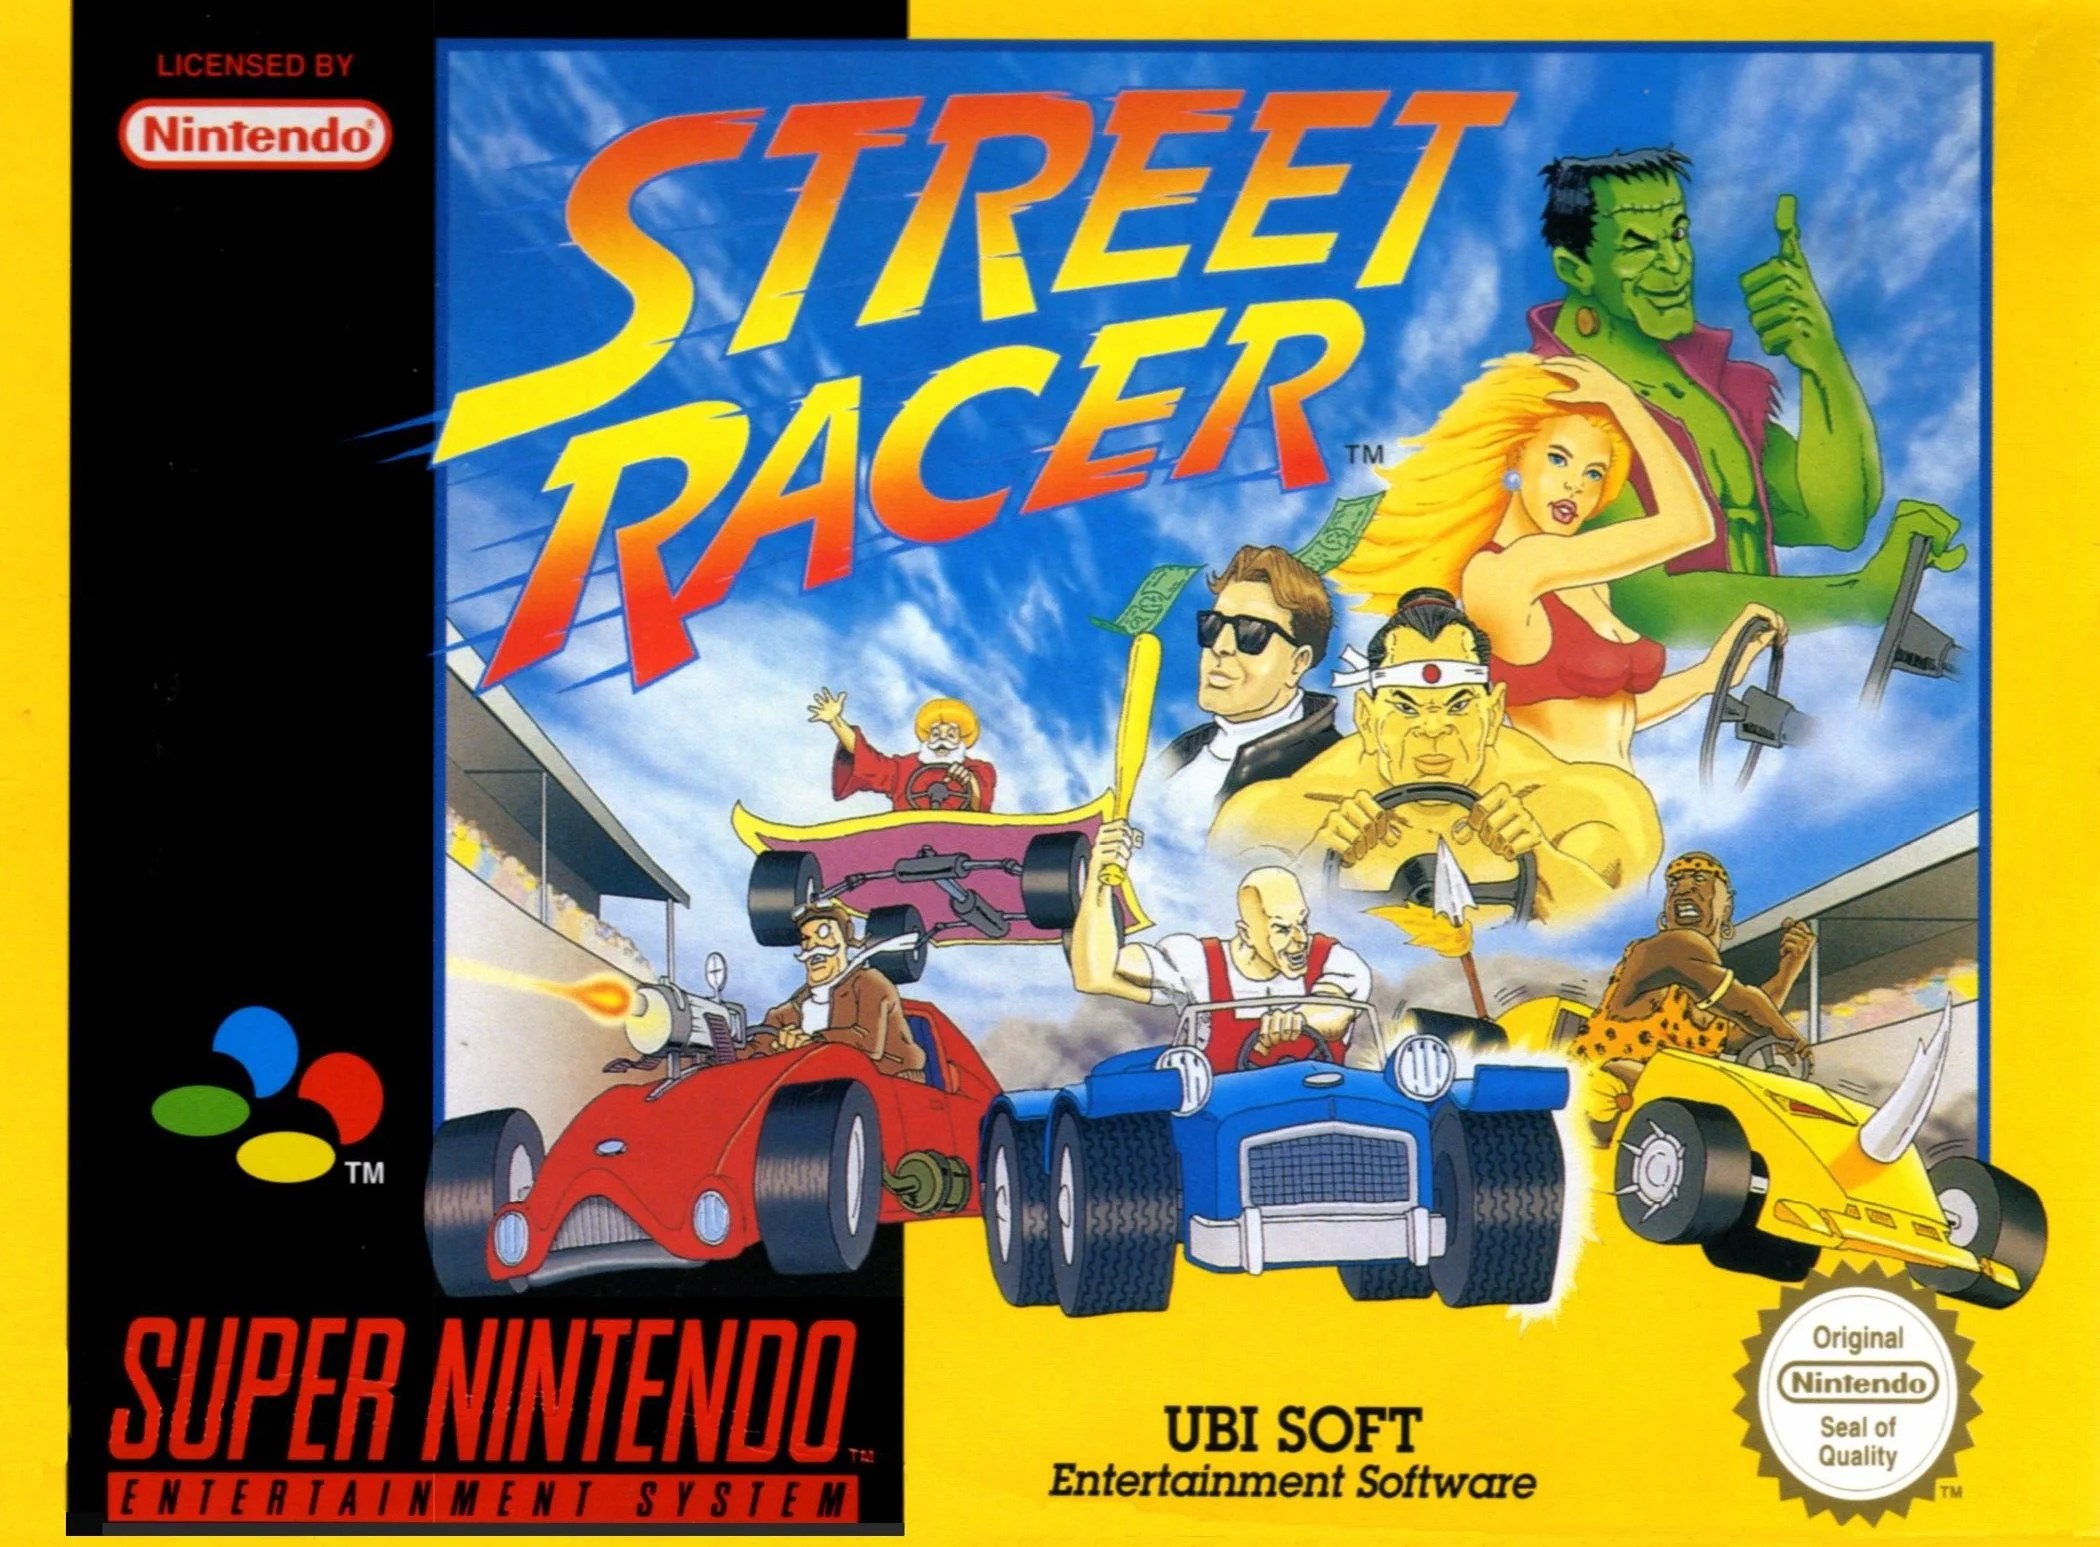 Streets Racer